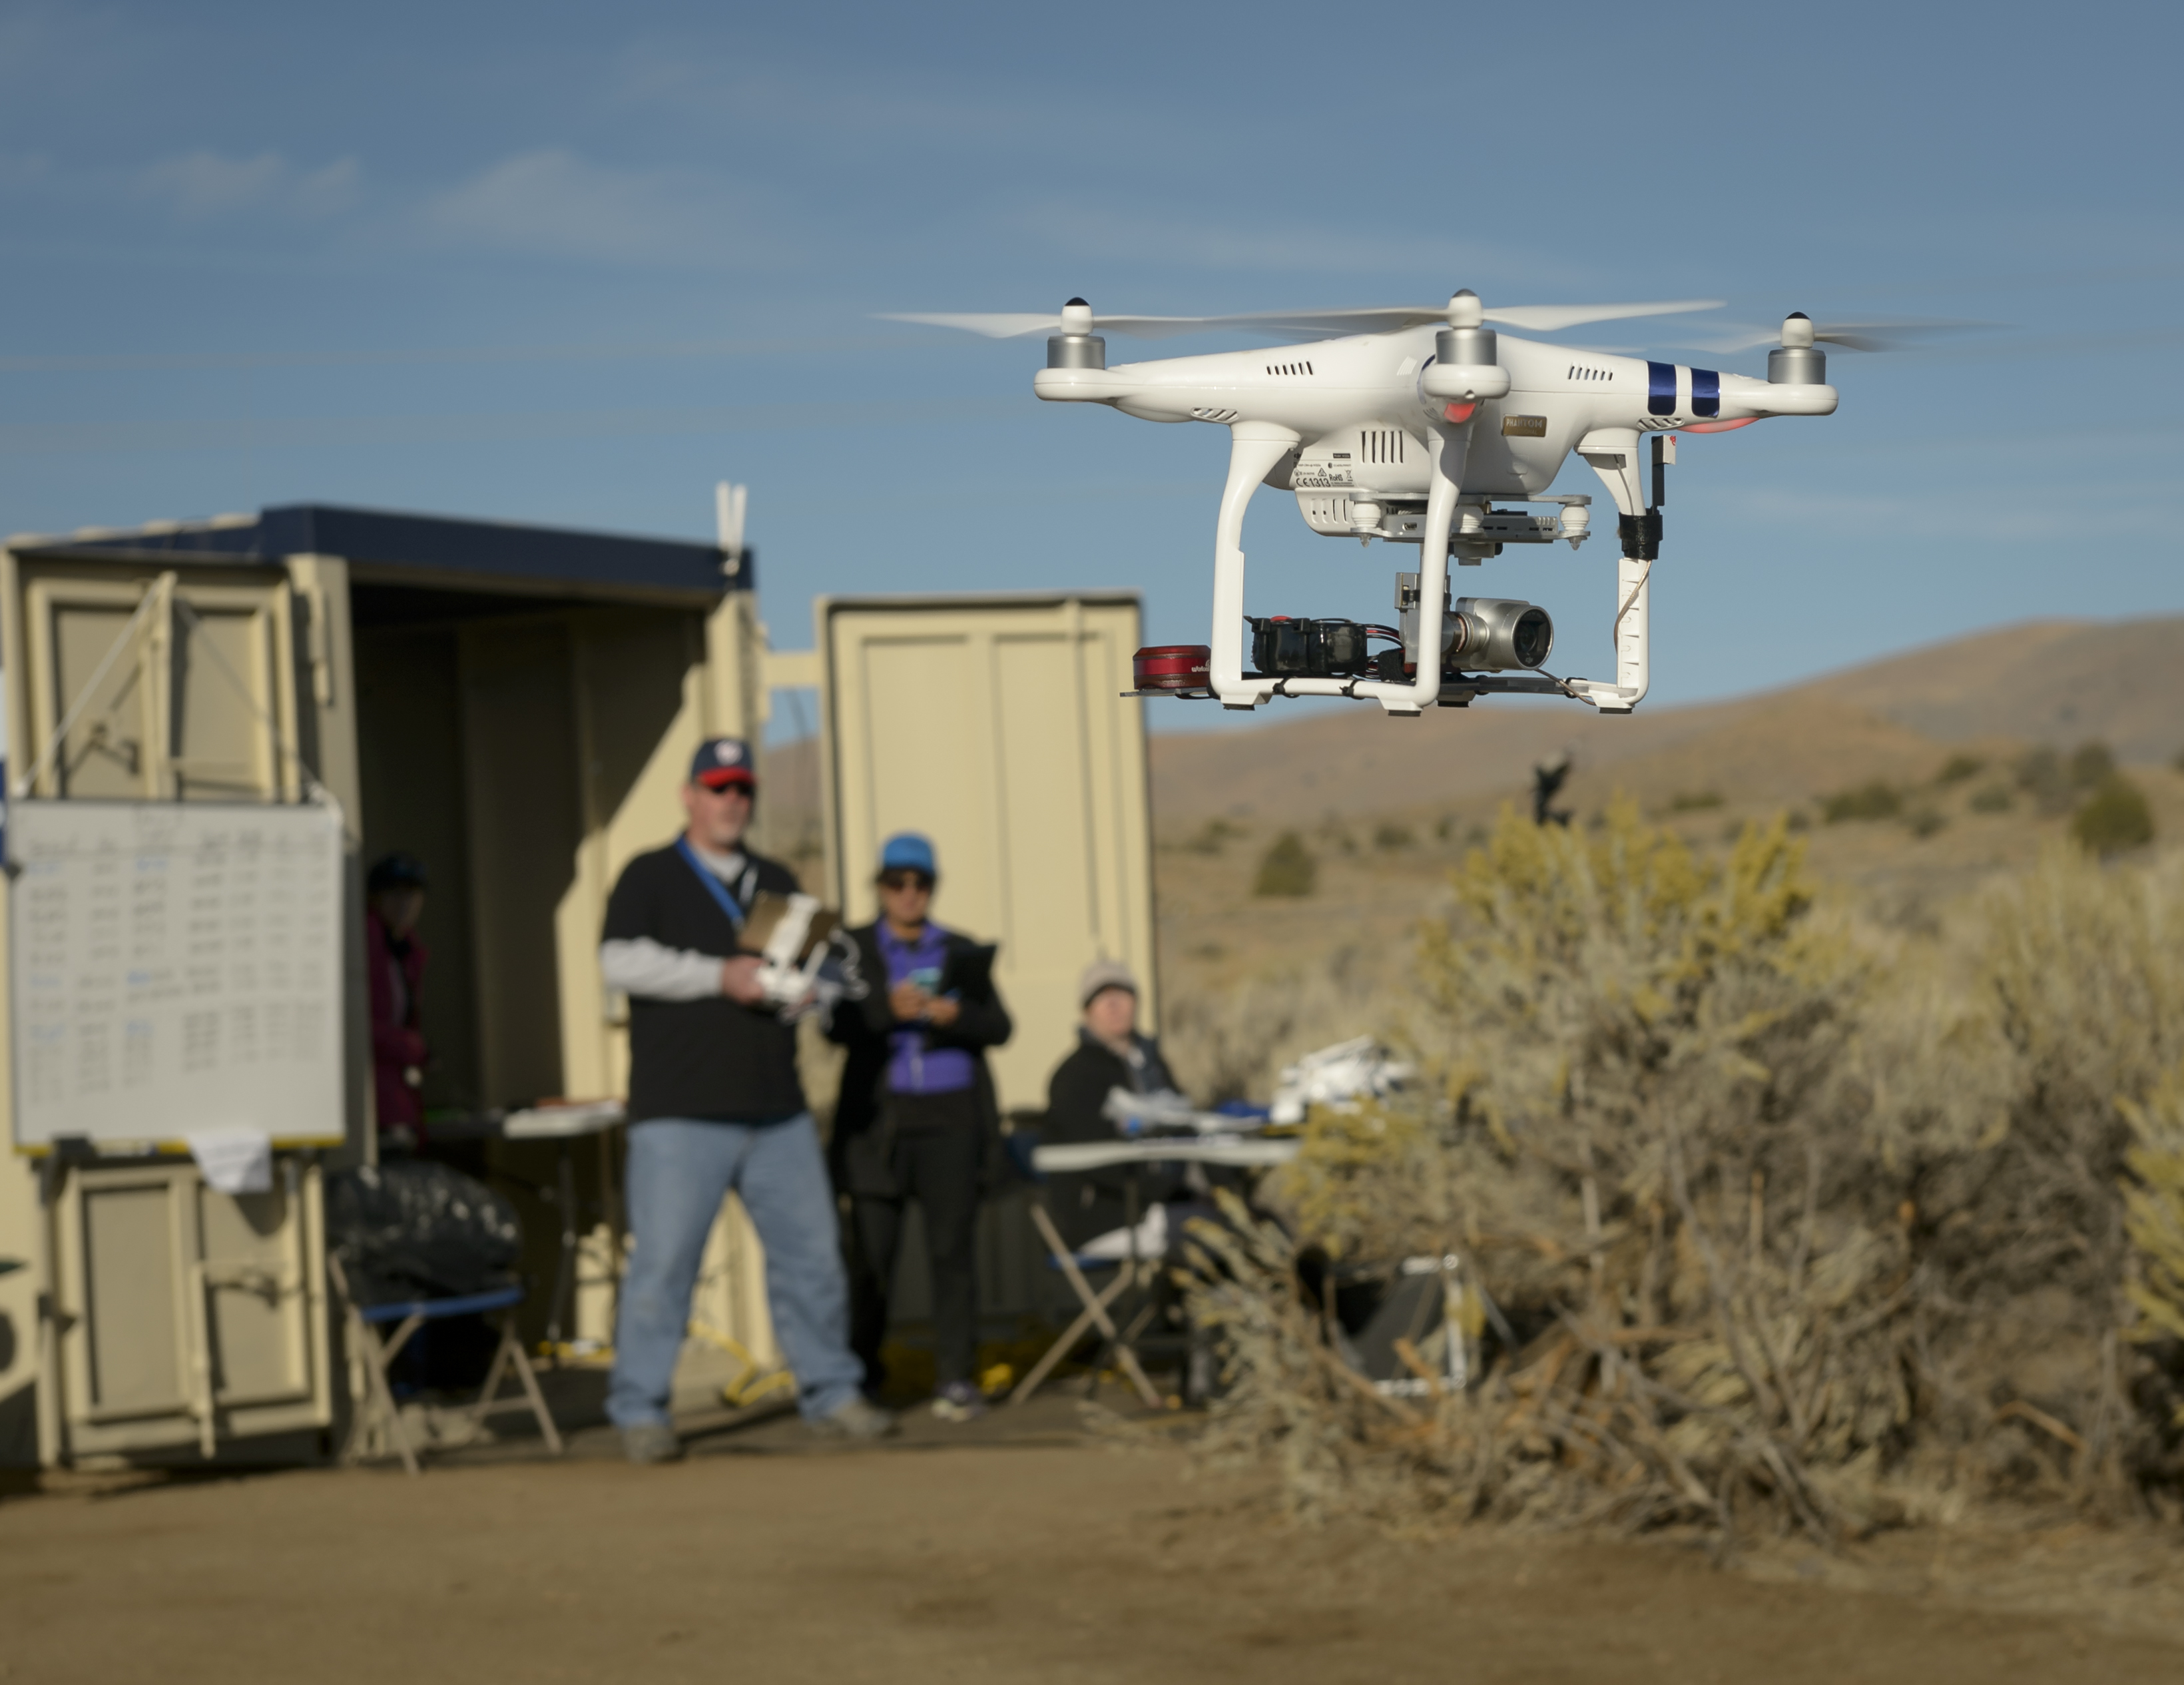 FREQUENTIS’ location information supports NASA UAS test in Nevada